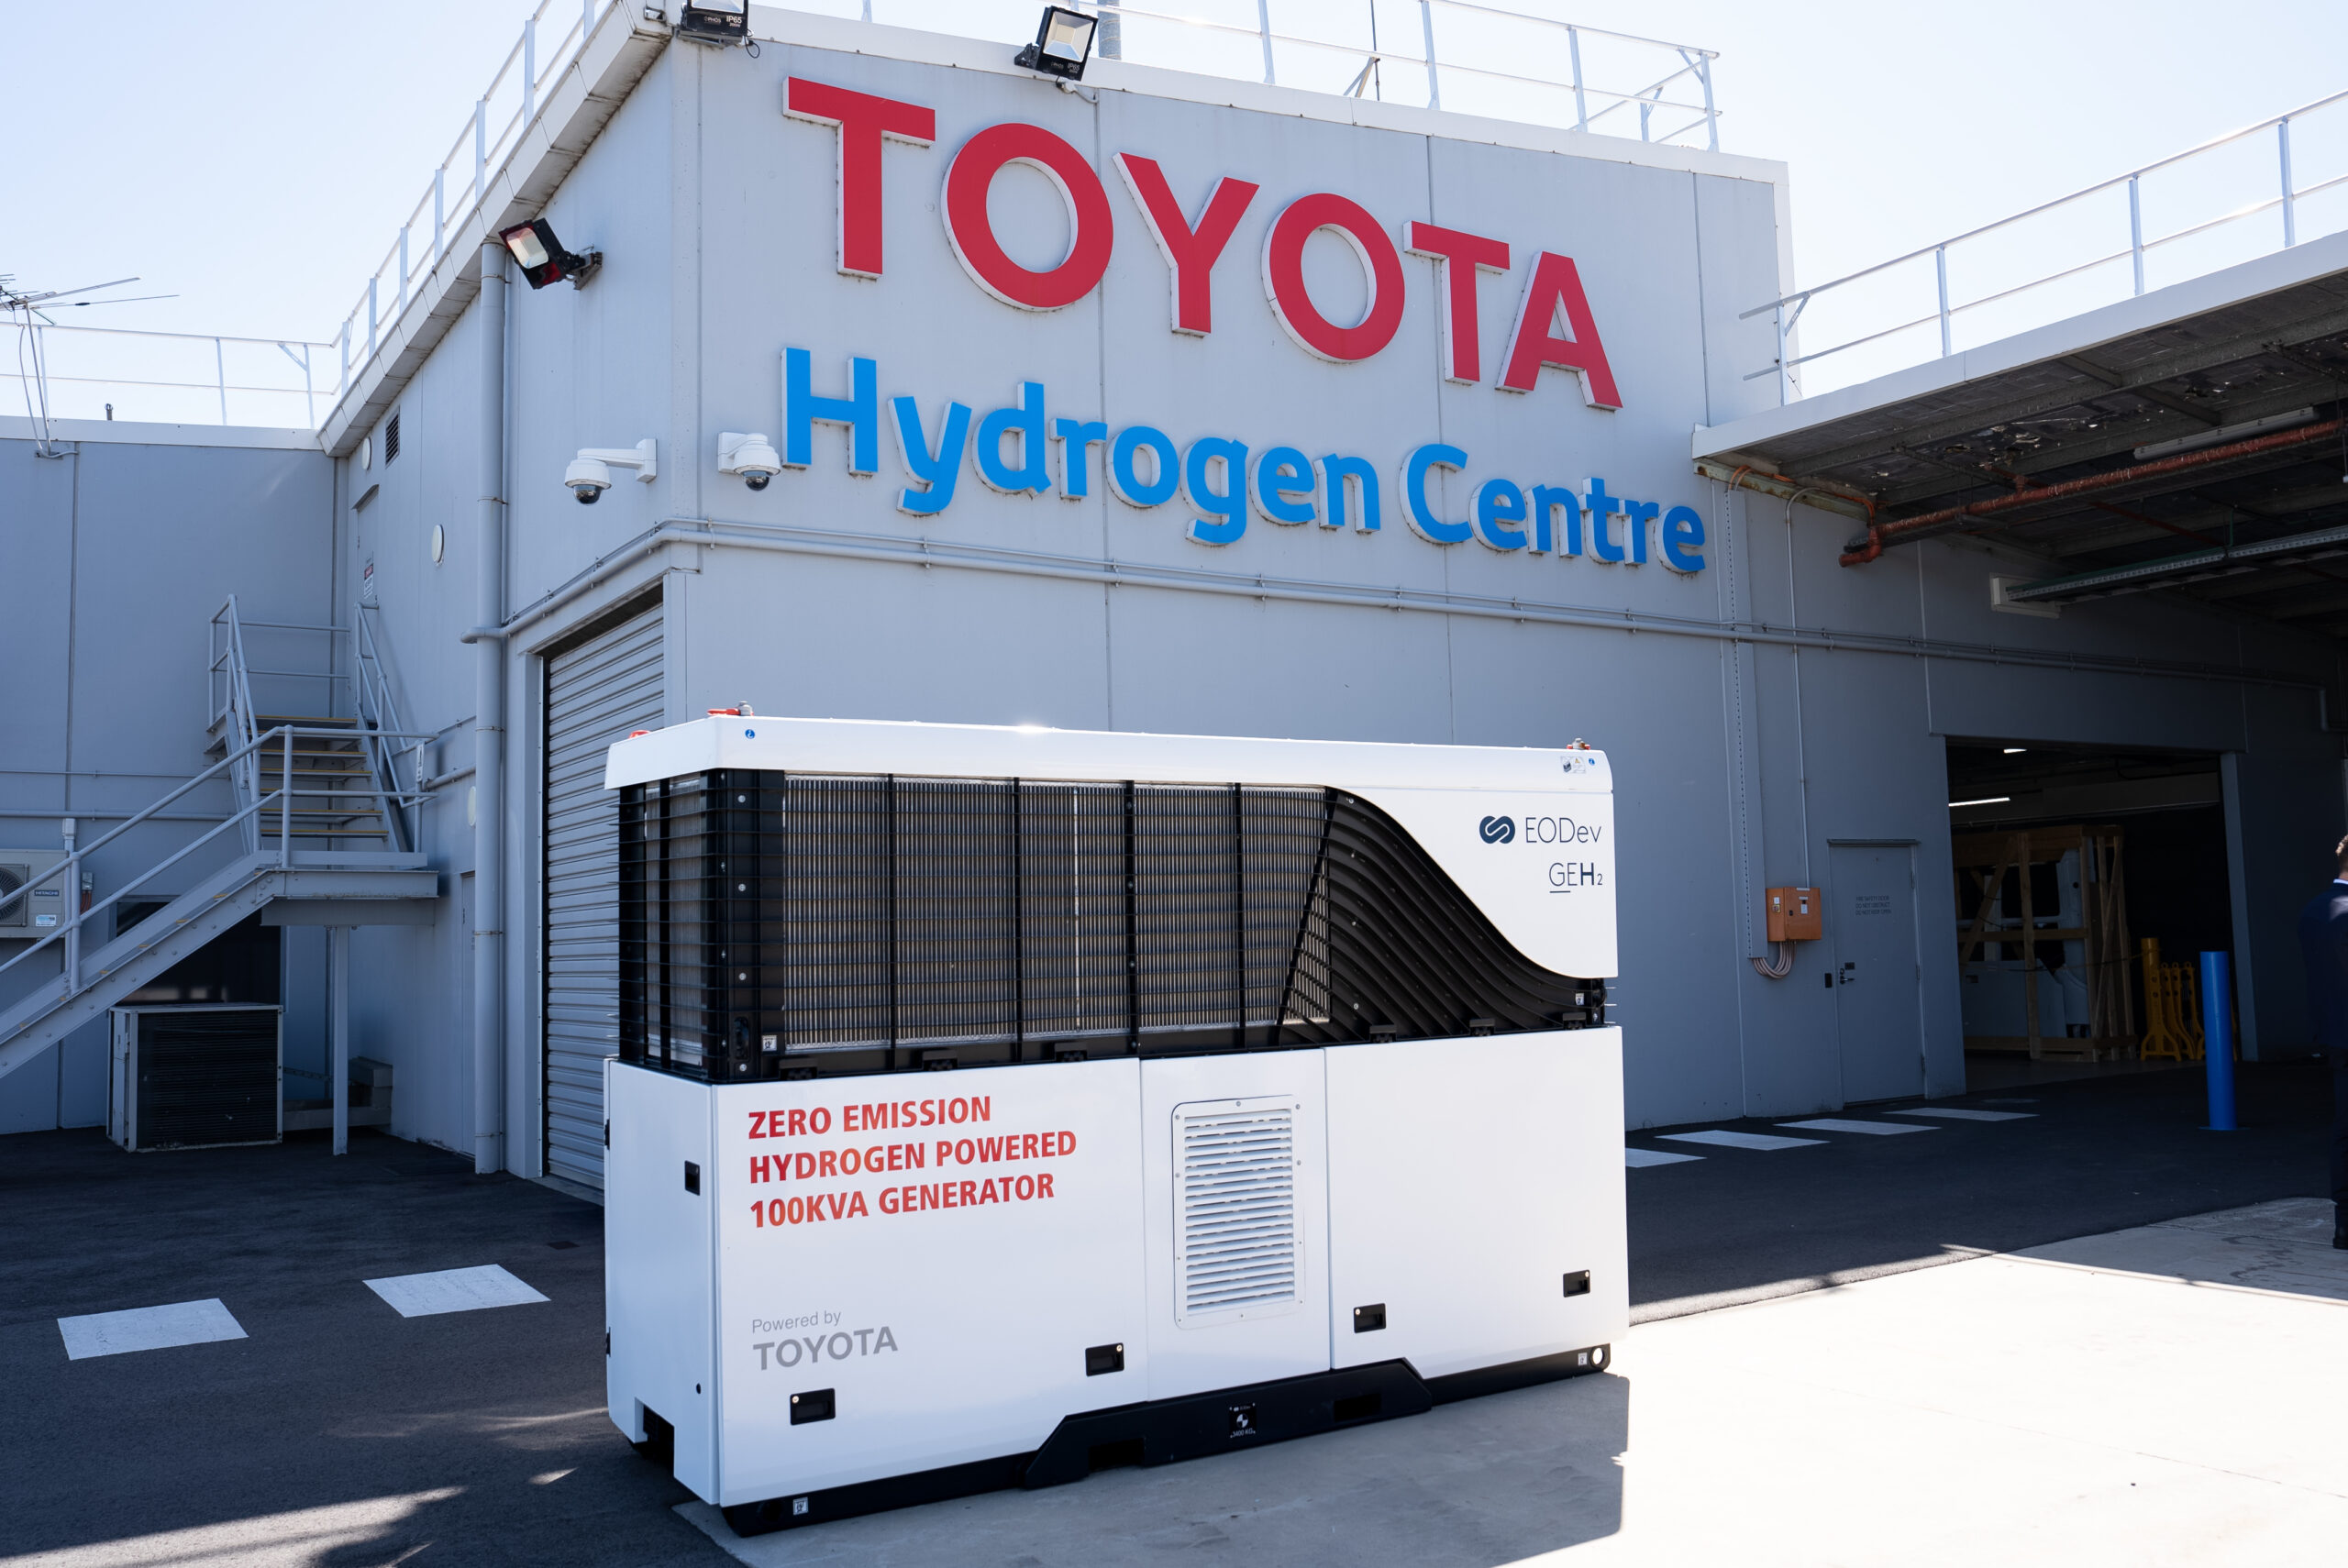 Toyota has partnered with EODev and Blue Diamond Machinery (BDM) to assemble, distribute and sell the GEH2 hydrogen fuel cell generator in Australia